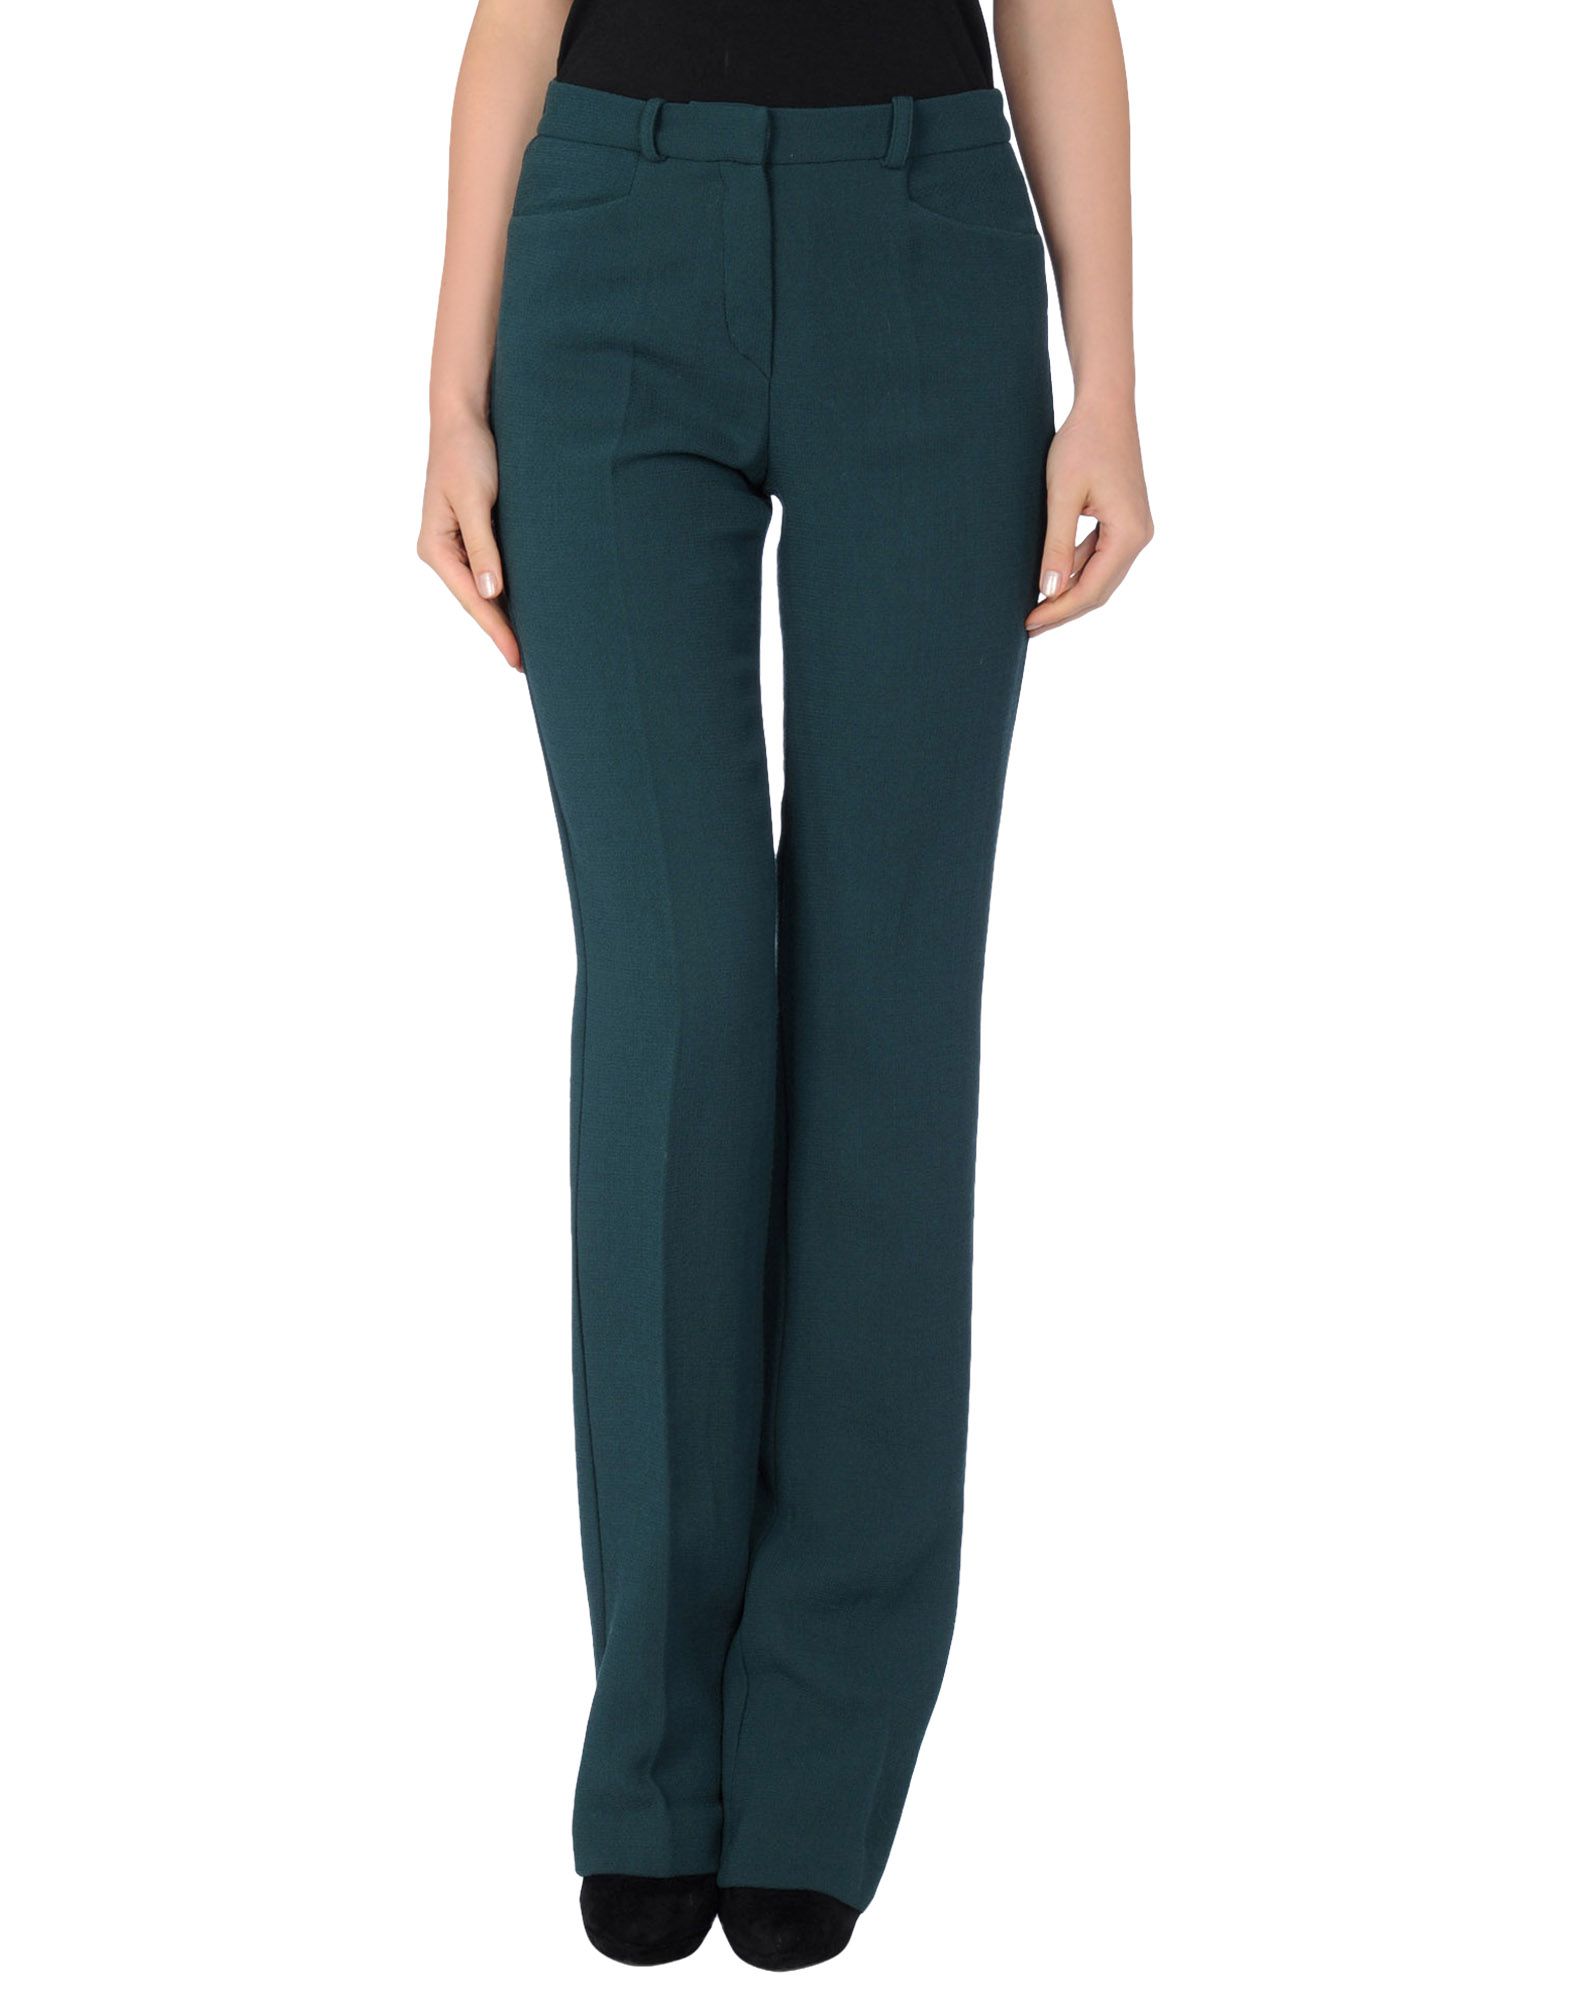 Foto Space Style Concept Pantalones Mujer Verde oscuro